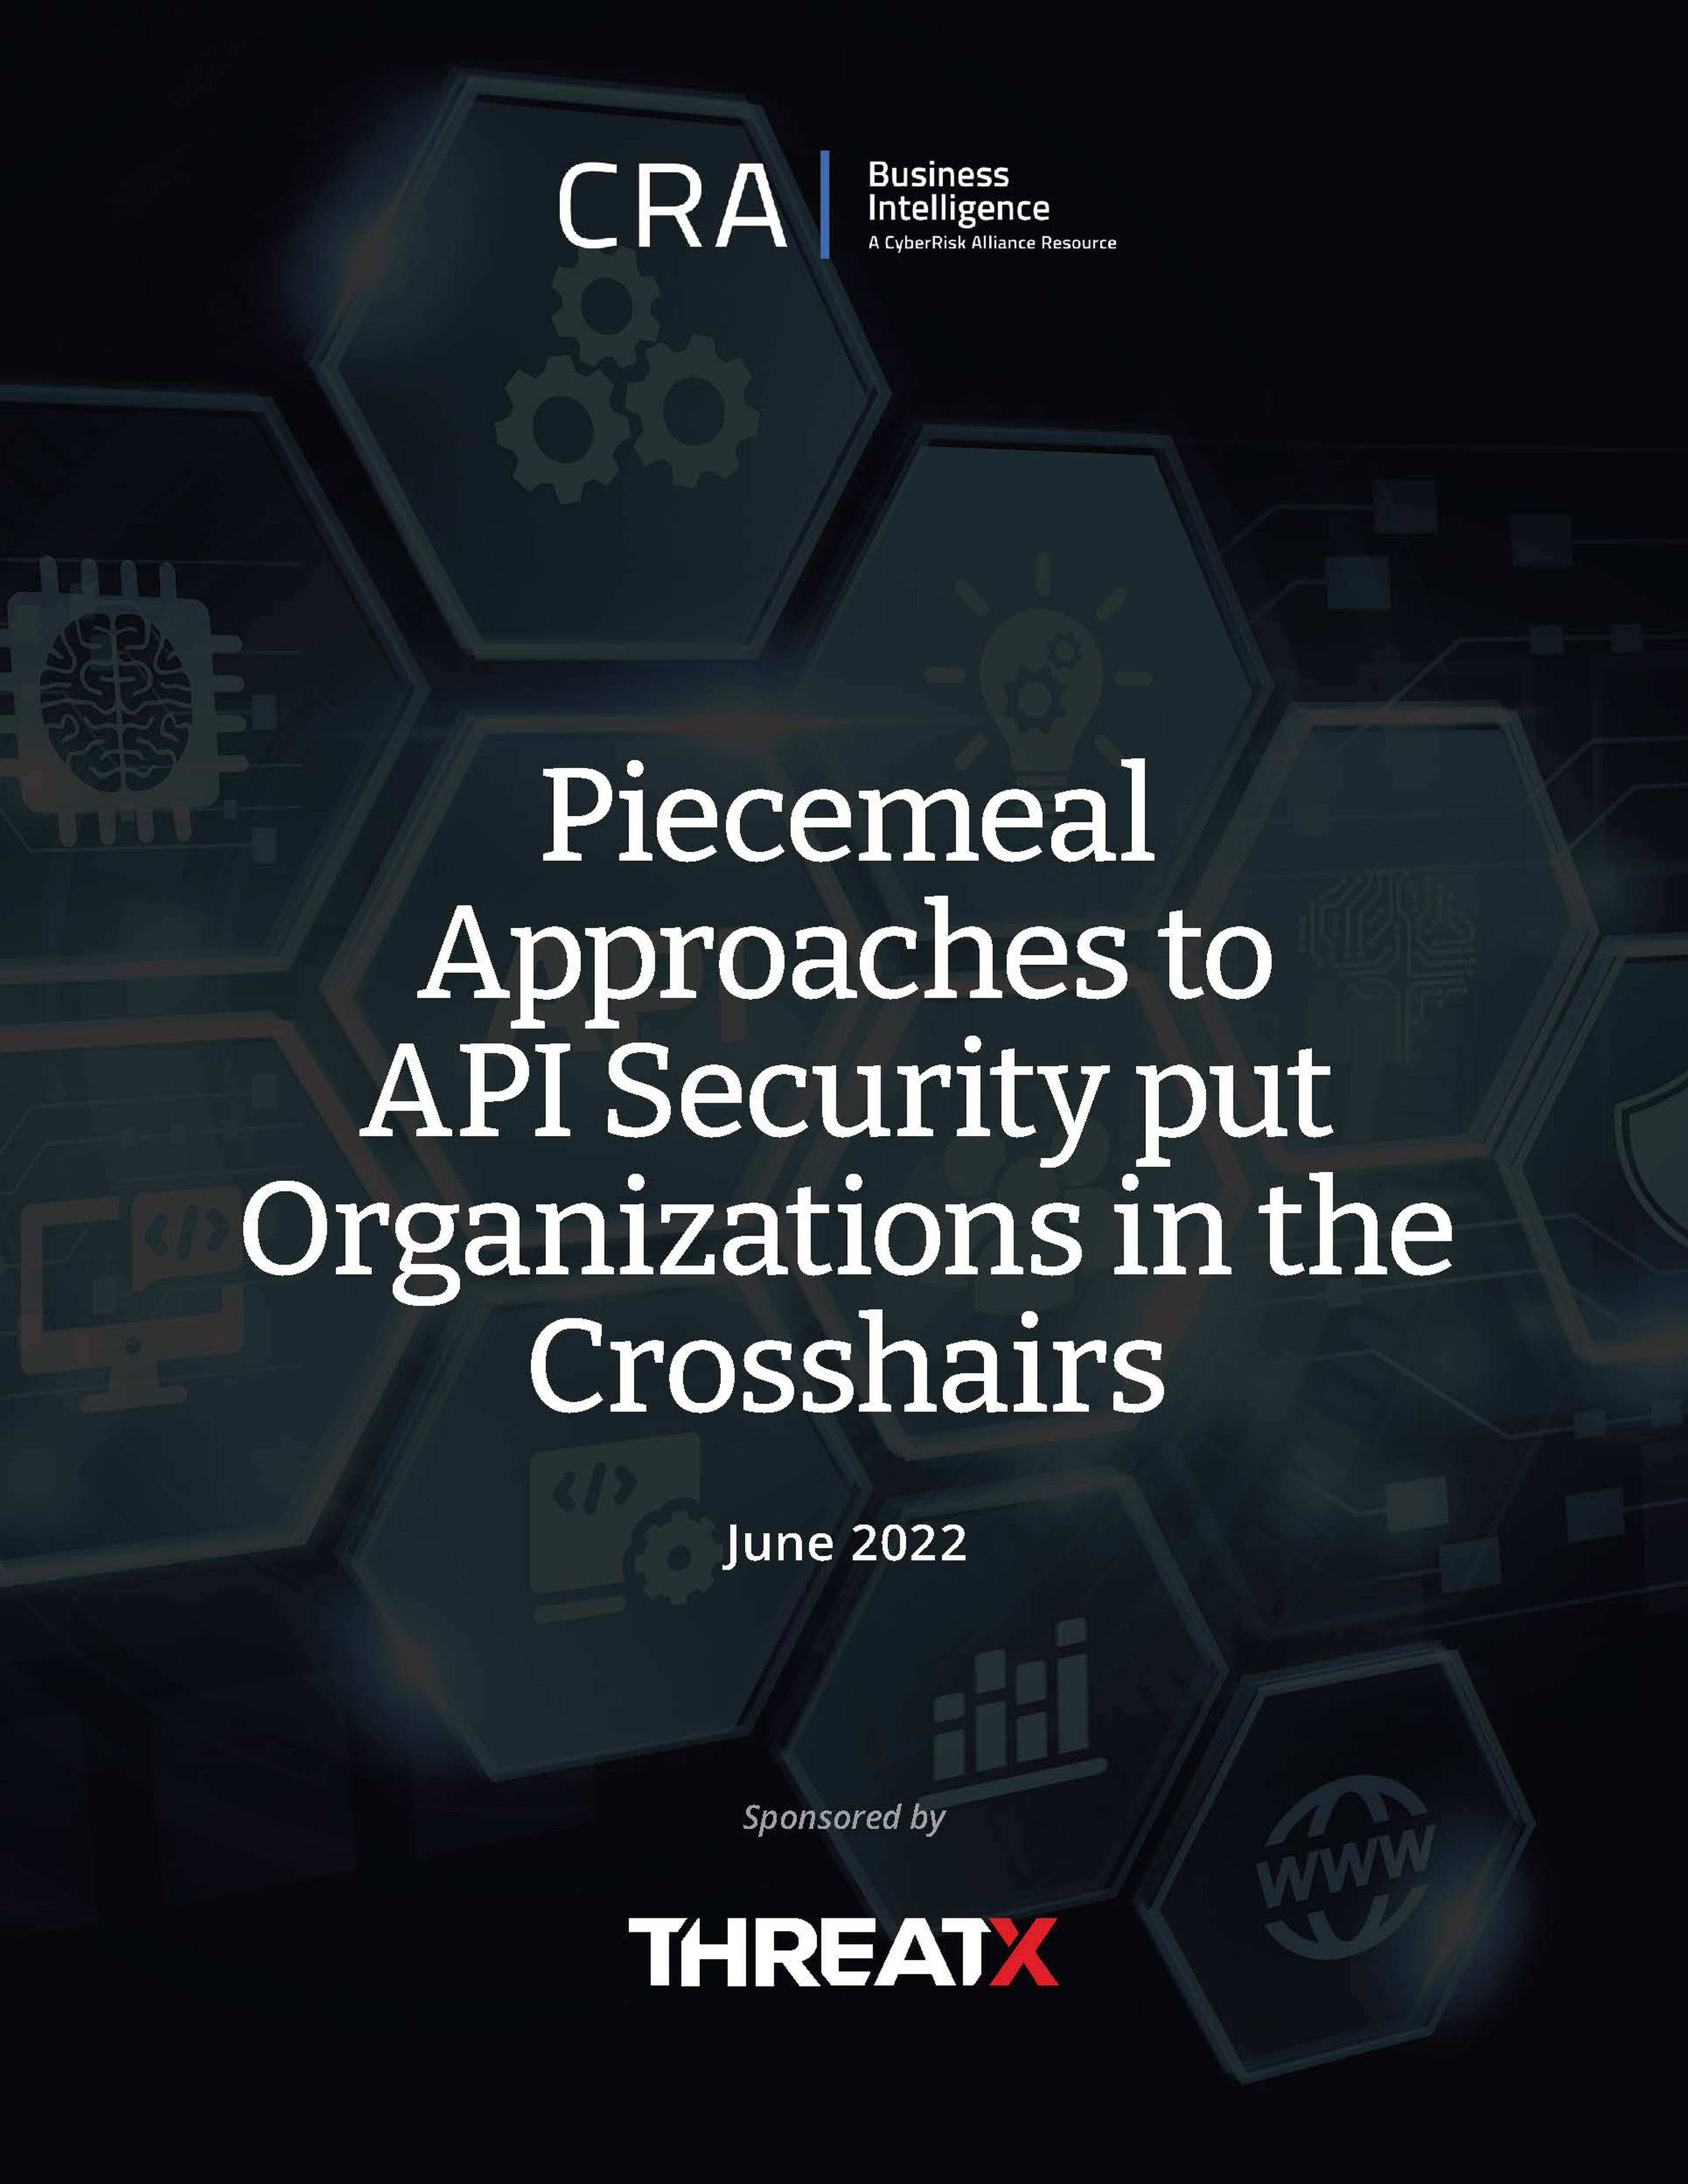 Piecemeal Approaches to API Security put Organizations in the Crosshairs